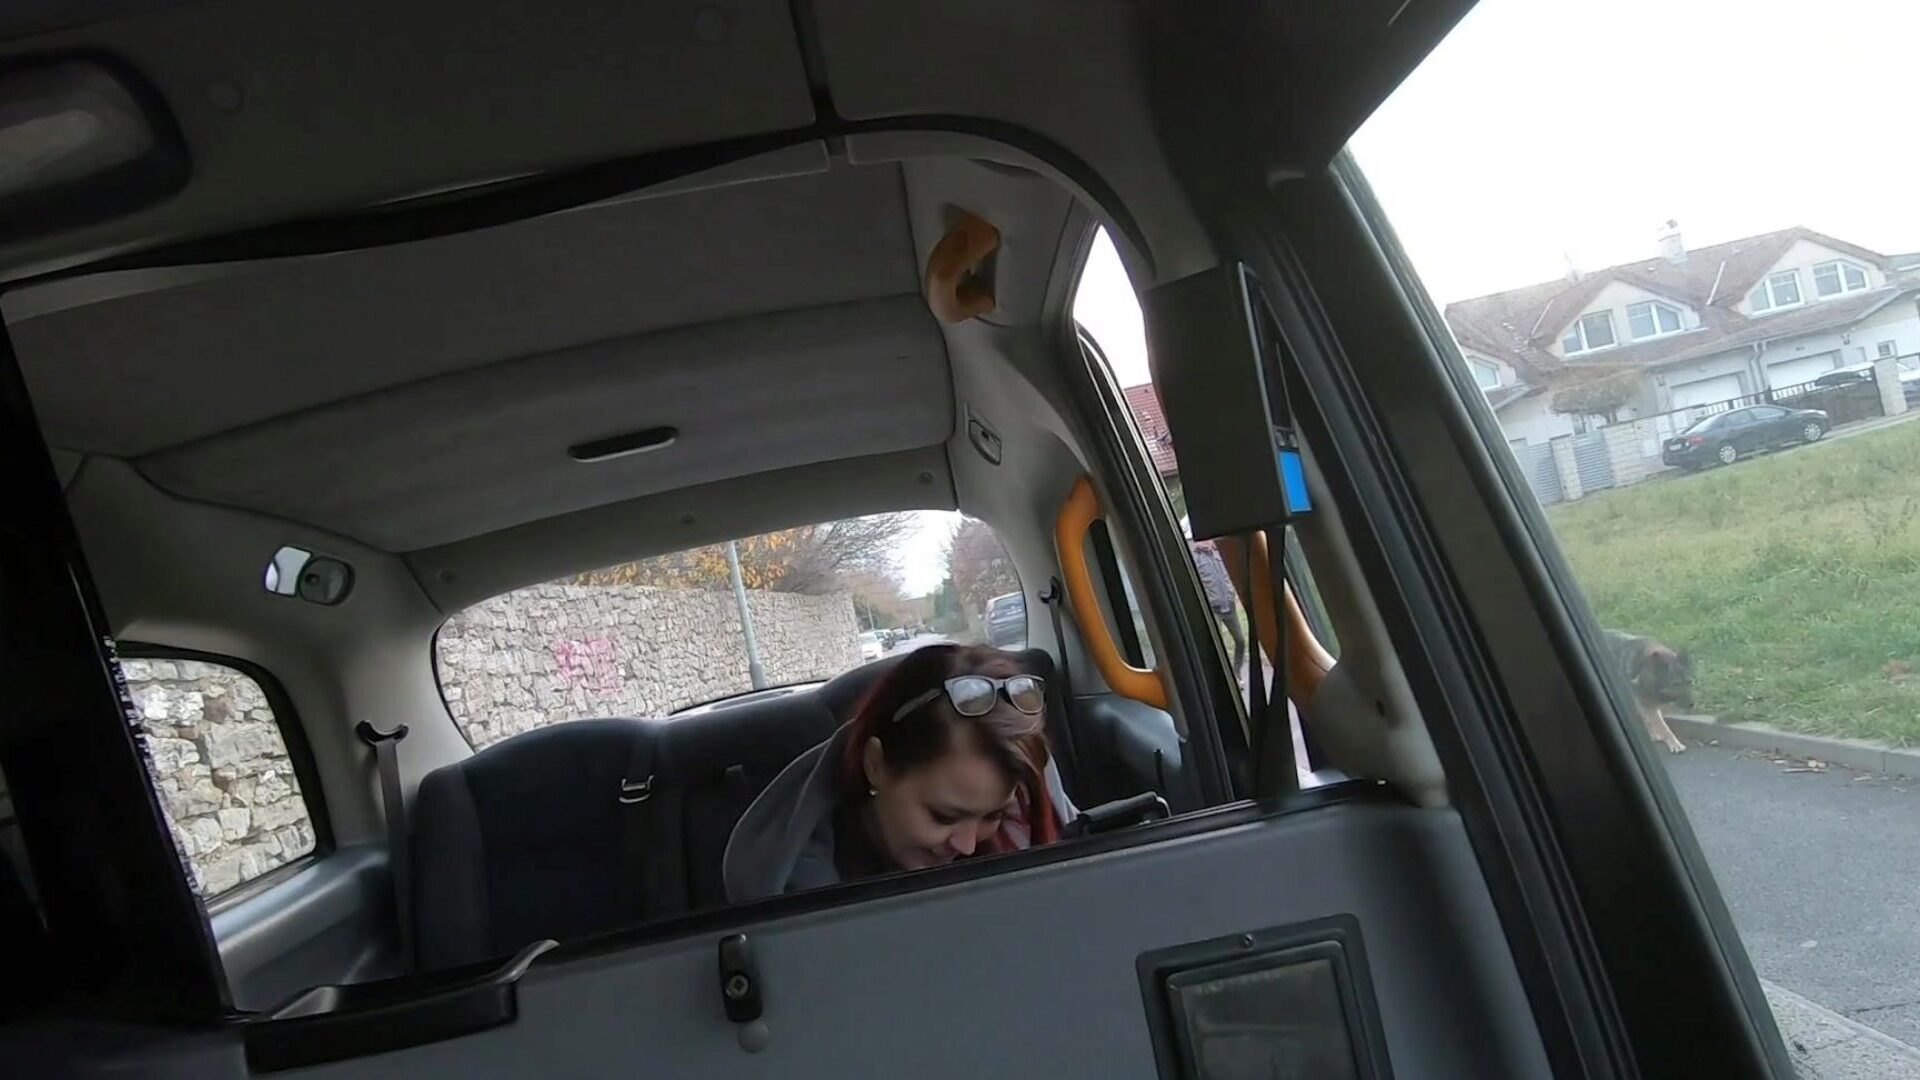 Fake Taxi Cindy Shine arched over the backseat of a London cab Sep 10th 2021